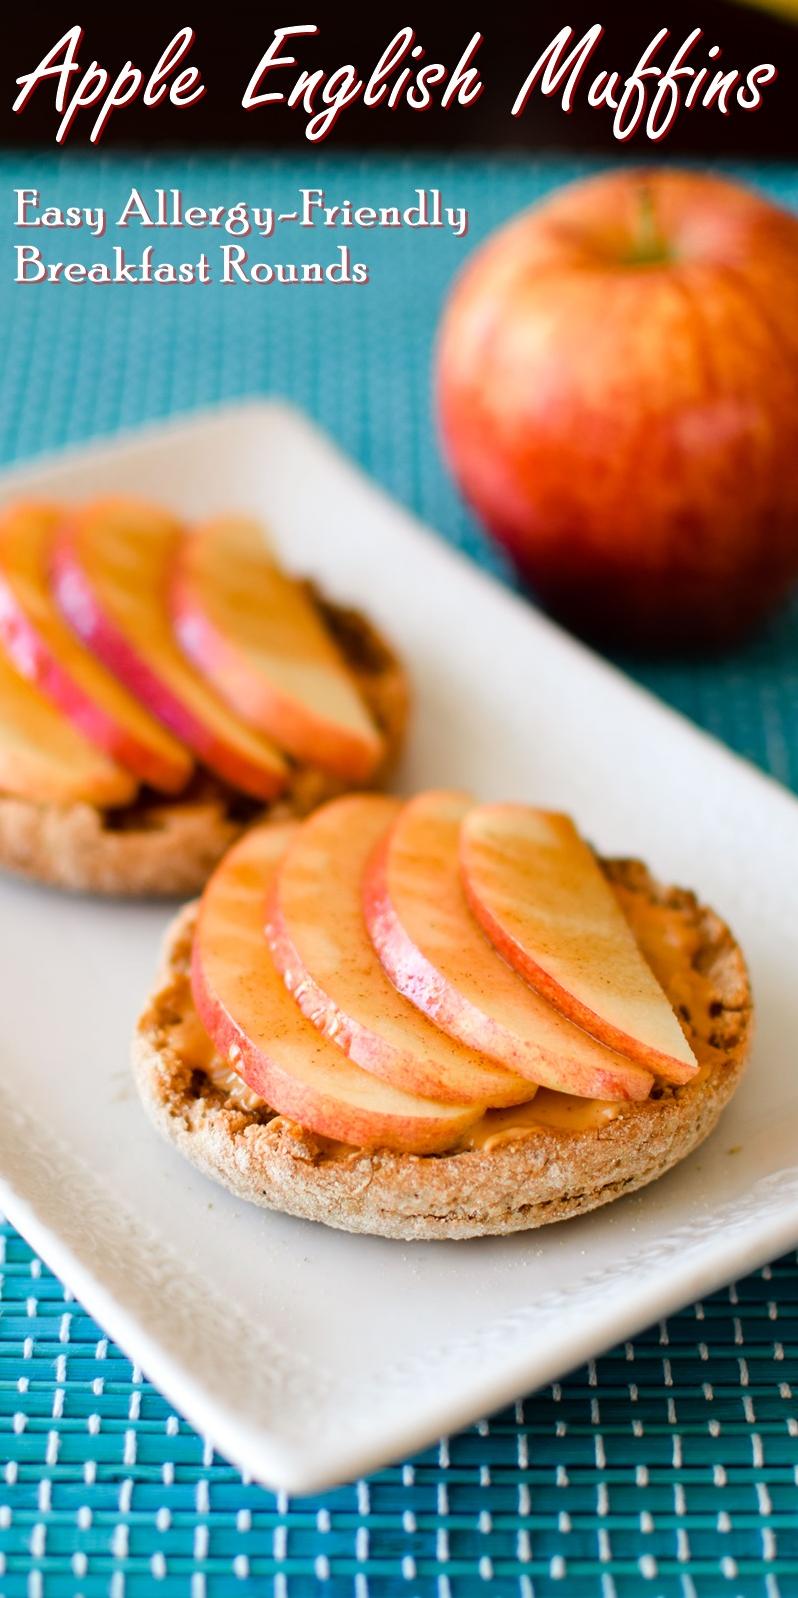  These perfectly toasted muffin rounds are loaded with juicy apple slices